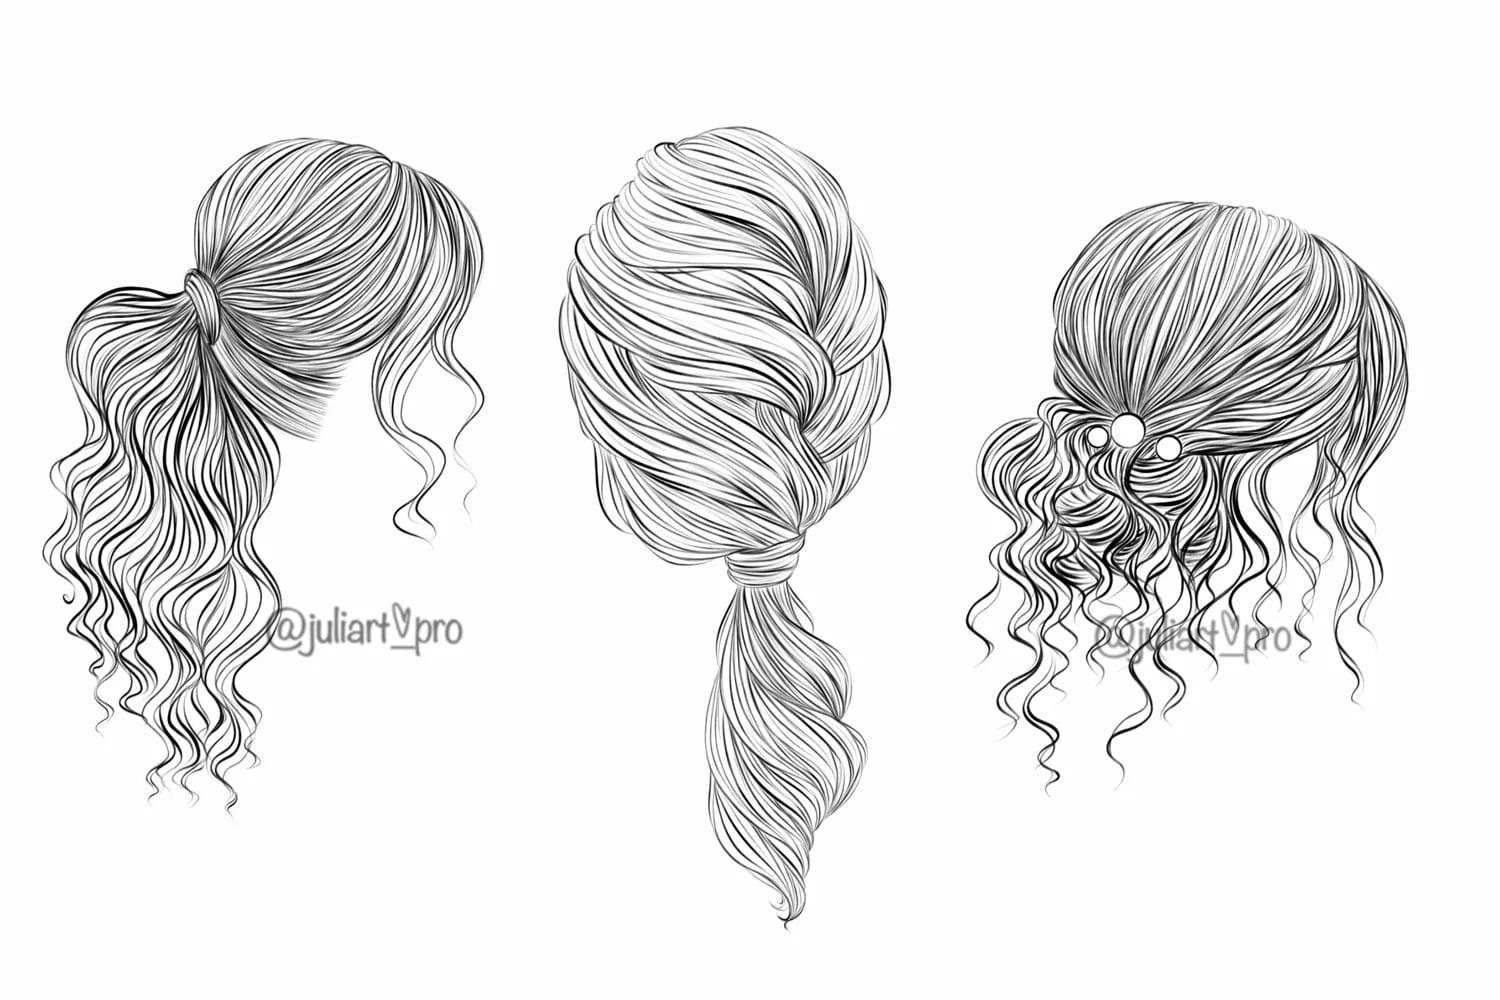 Set of three different styles of hair.